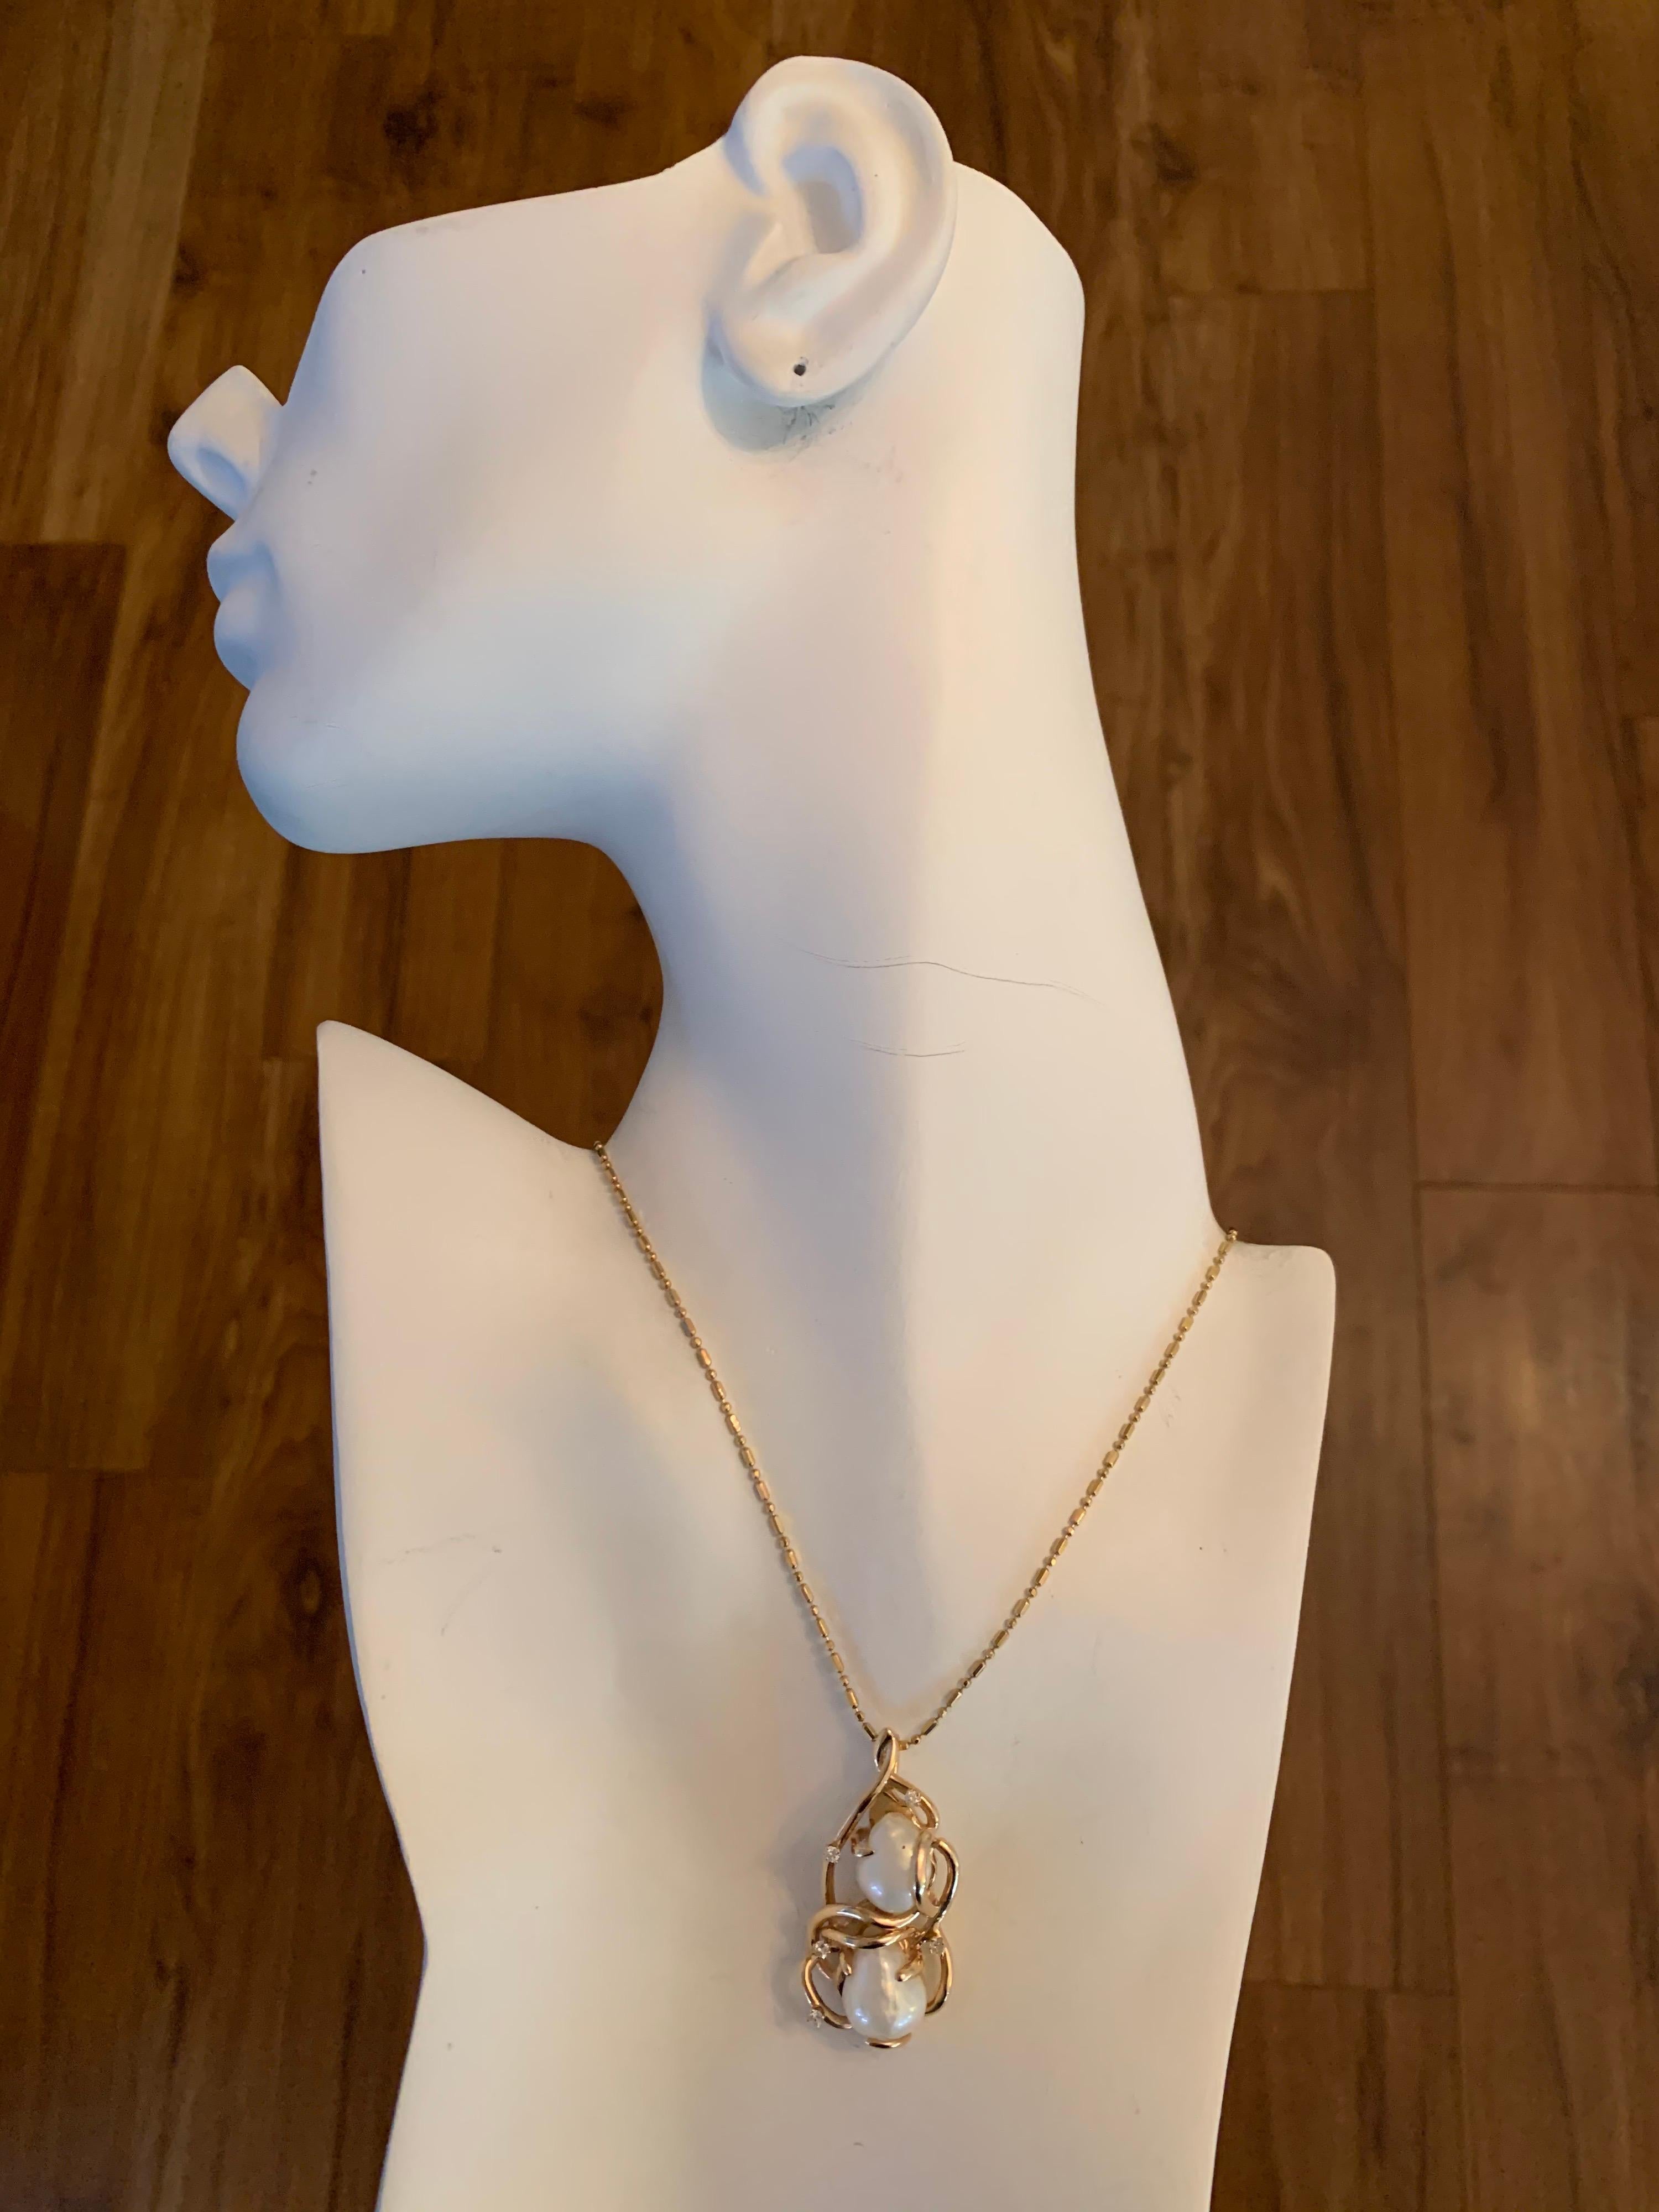 Retro 14k Yellow Gold Pendant 0.20 Carat Natural Diamond (F-G, VS) & Pearl Hand Craft Circa 1980.

Total weight of the pendant is 13.5 grams, chain not included.